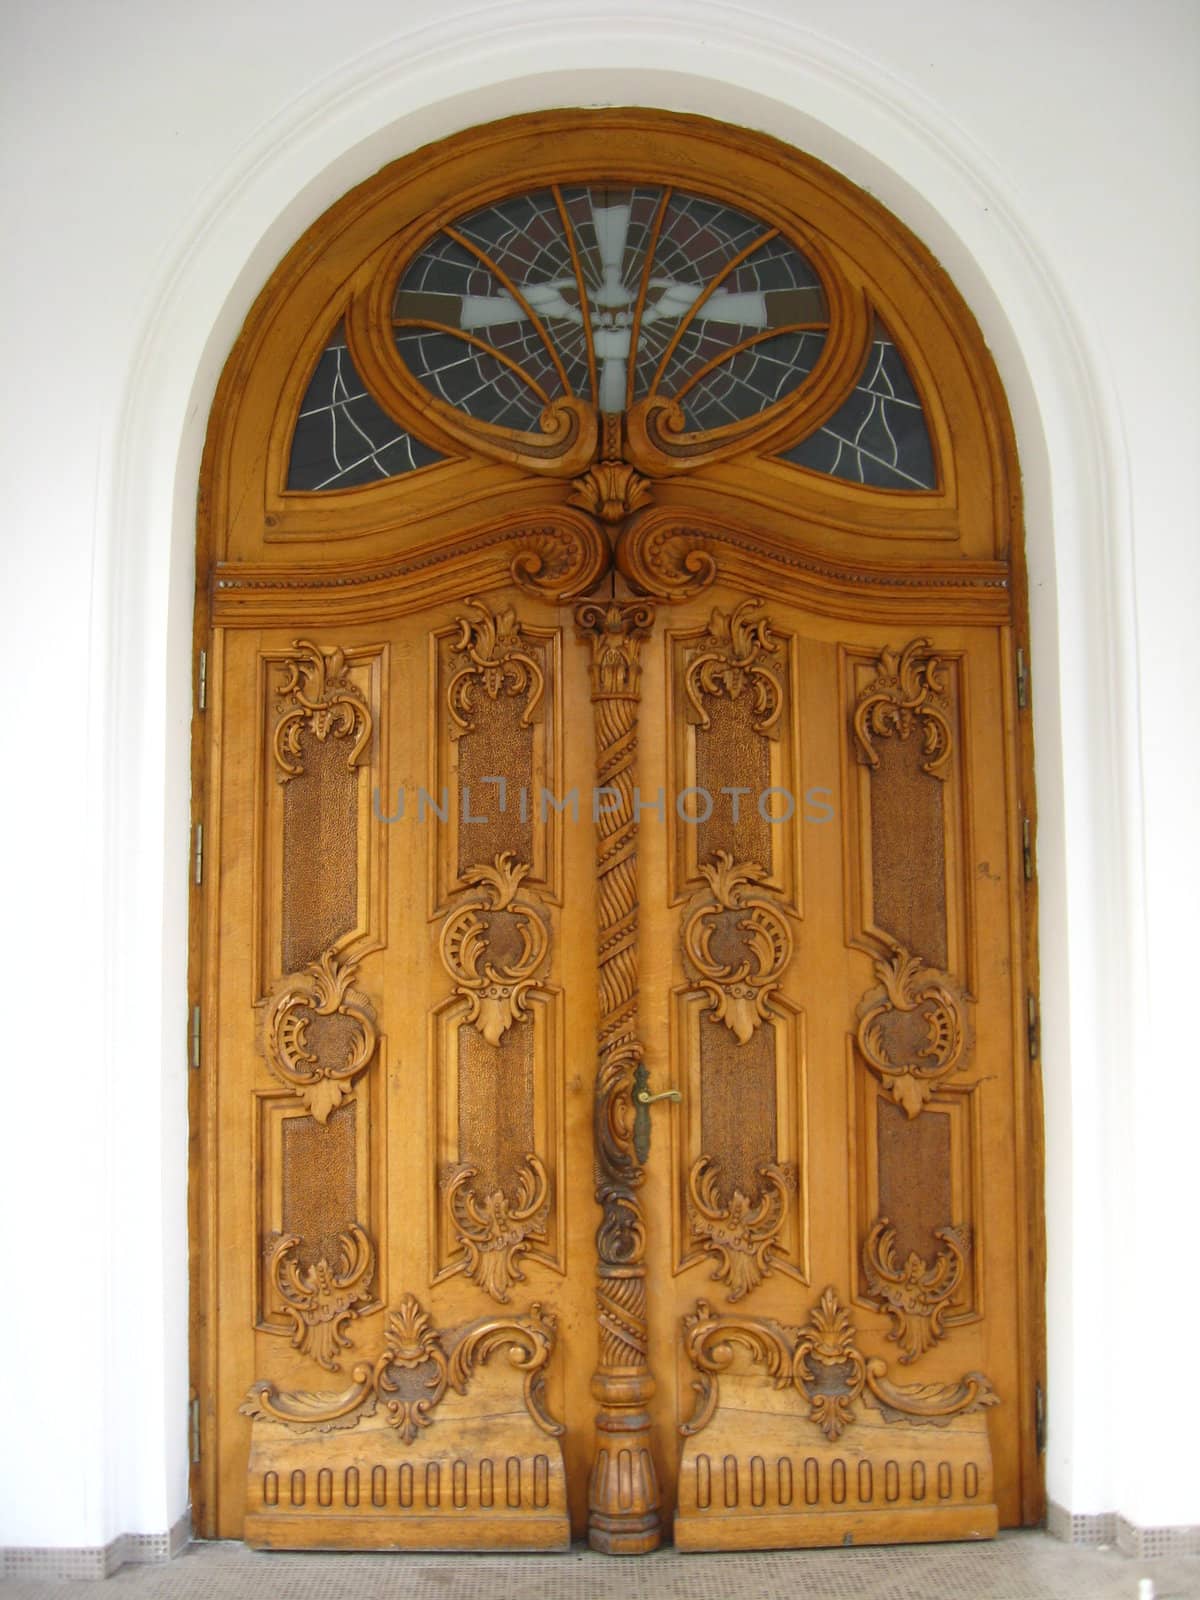 Beautiful wooden gate in Catholic church with patterns